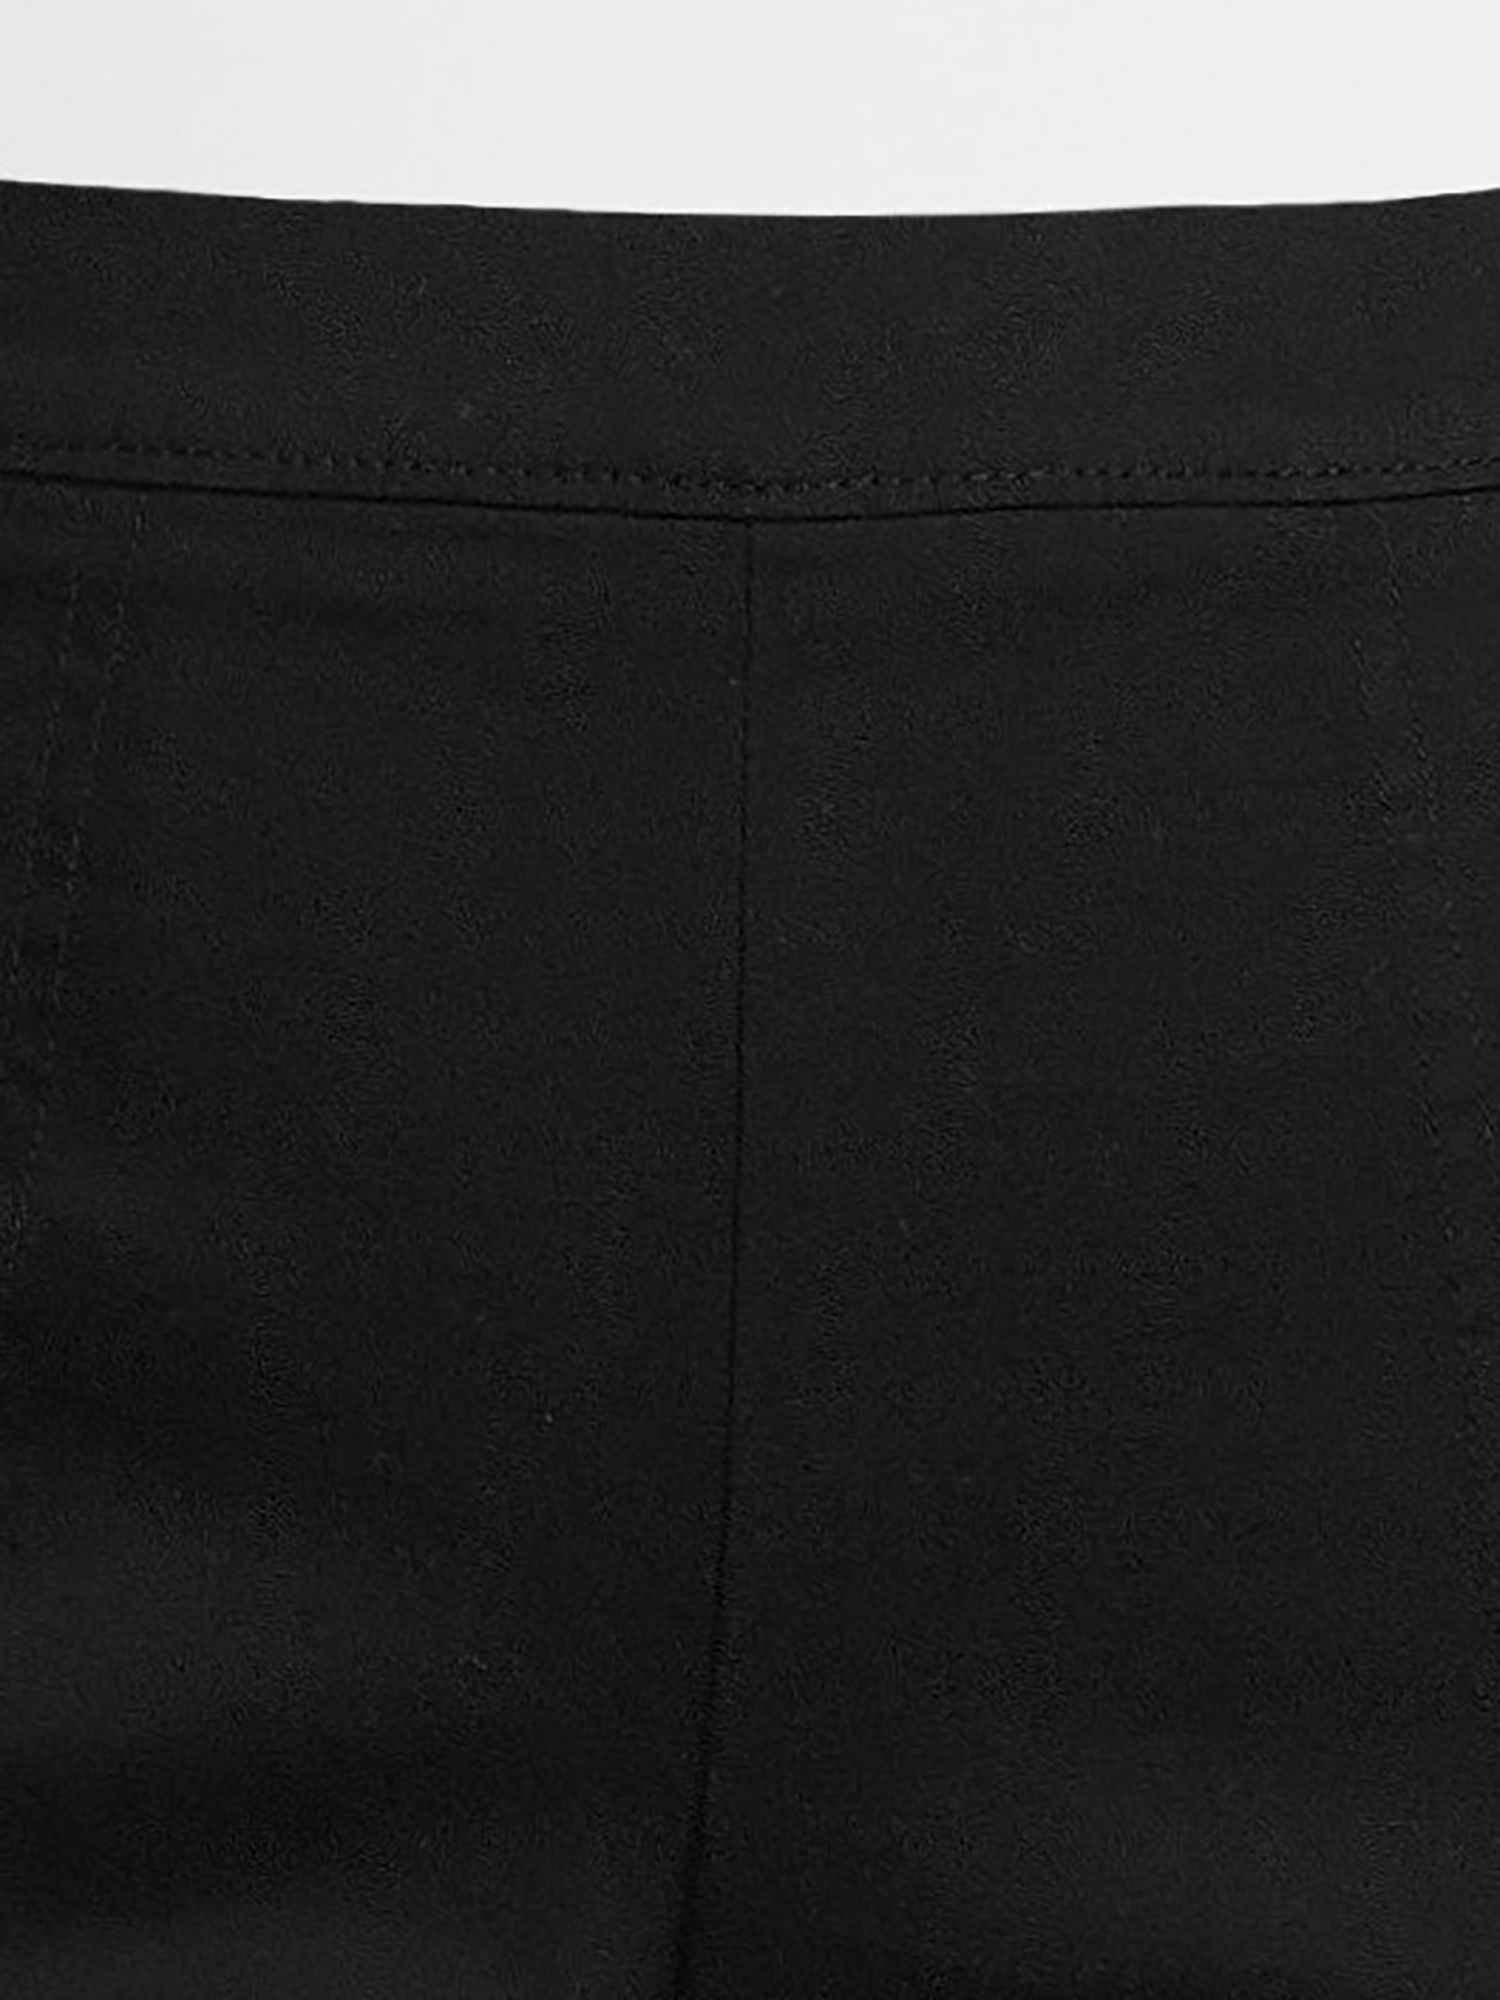 Just My Size Women's Plus 2 Pocket Pull-On Pant - image 4 of 6